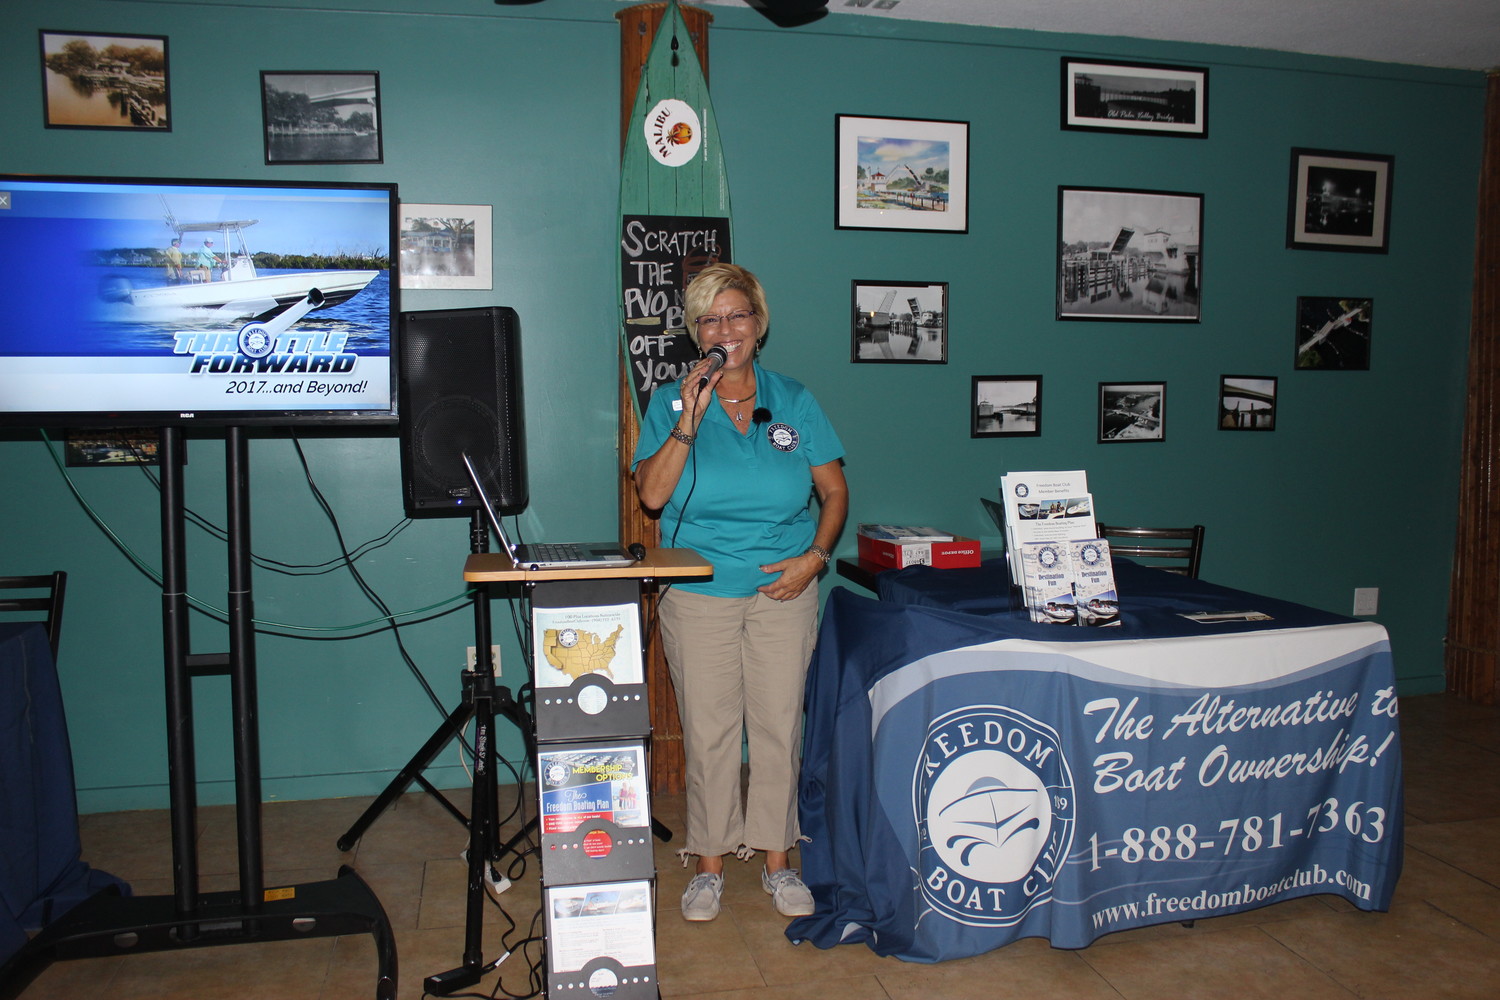 Freedom Boat Club owner Lisa Almeida addresses the crowd at the Chamber ribbon cutting event.